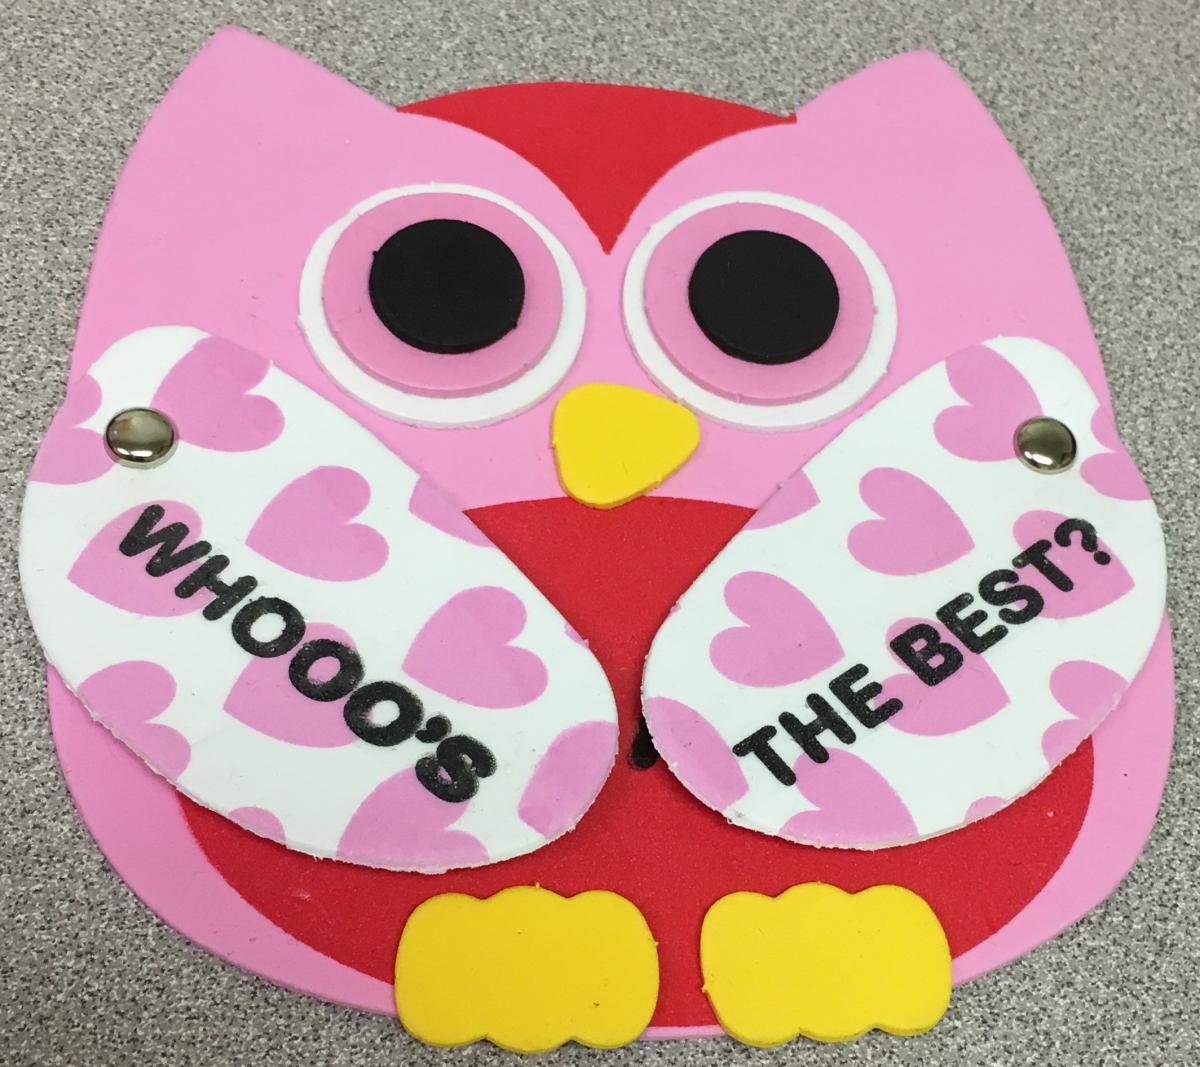 Valentine of owl with text "Whooo's the best?" on its wings